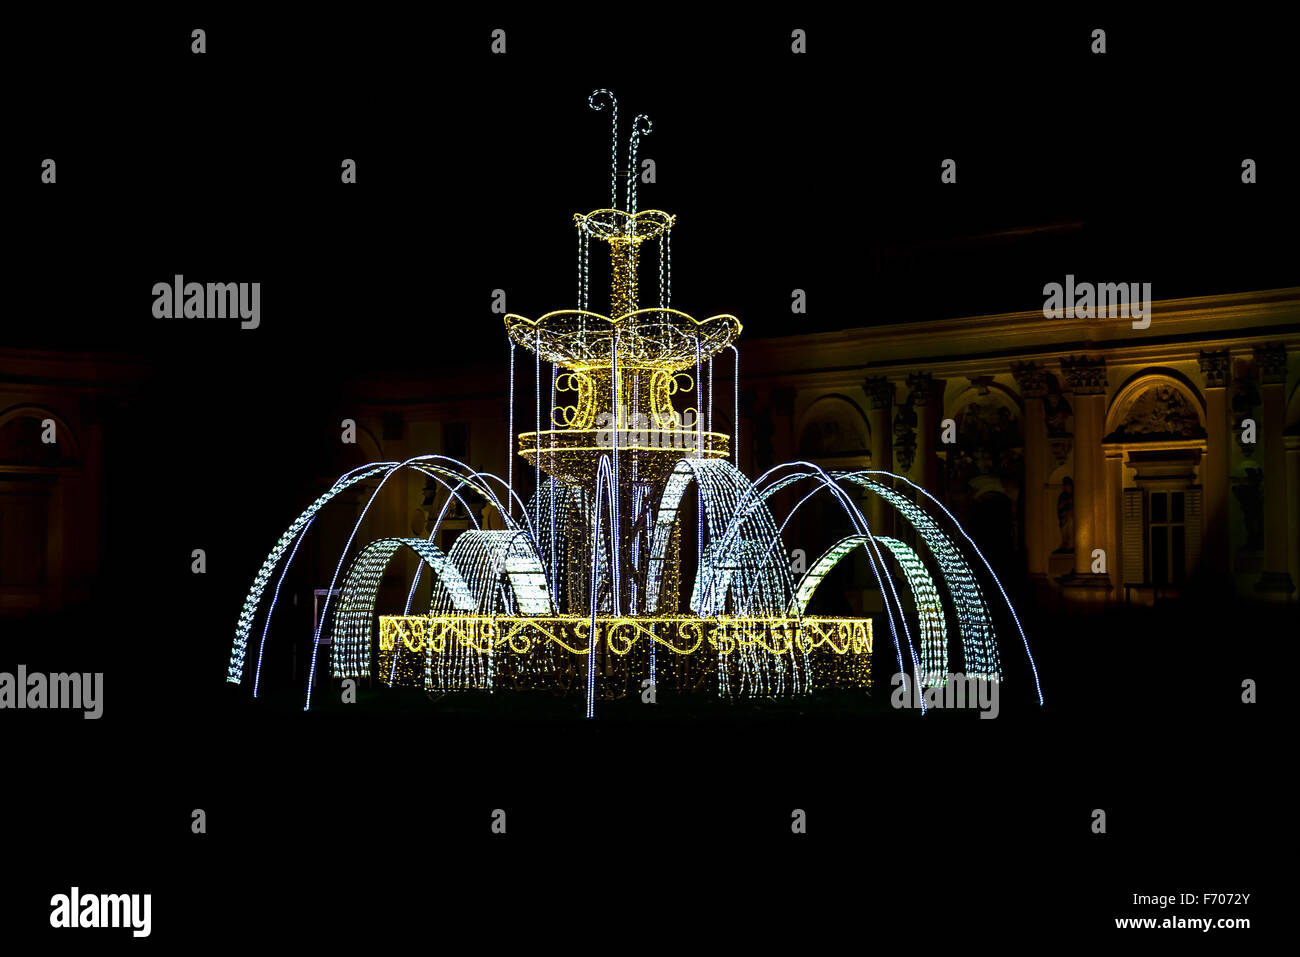 Fountain made from Christmas Lamps near Building at Night Stock Photo